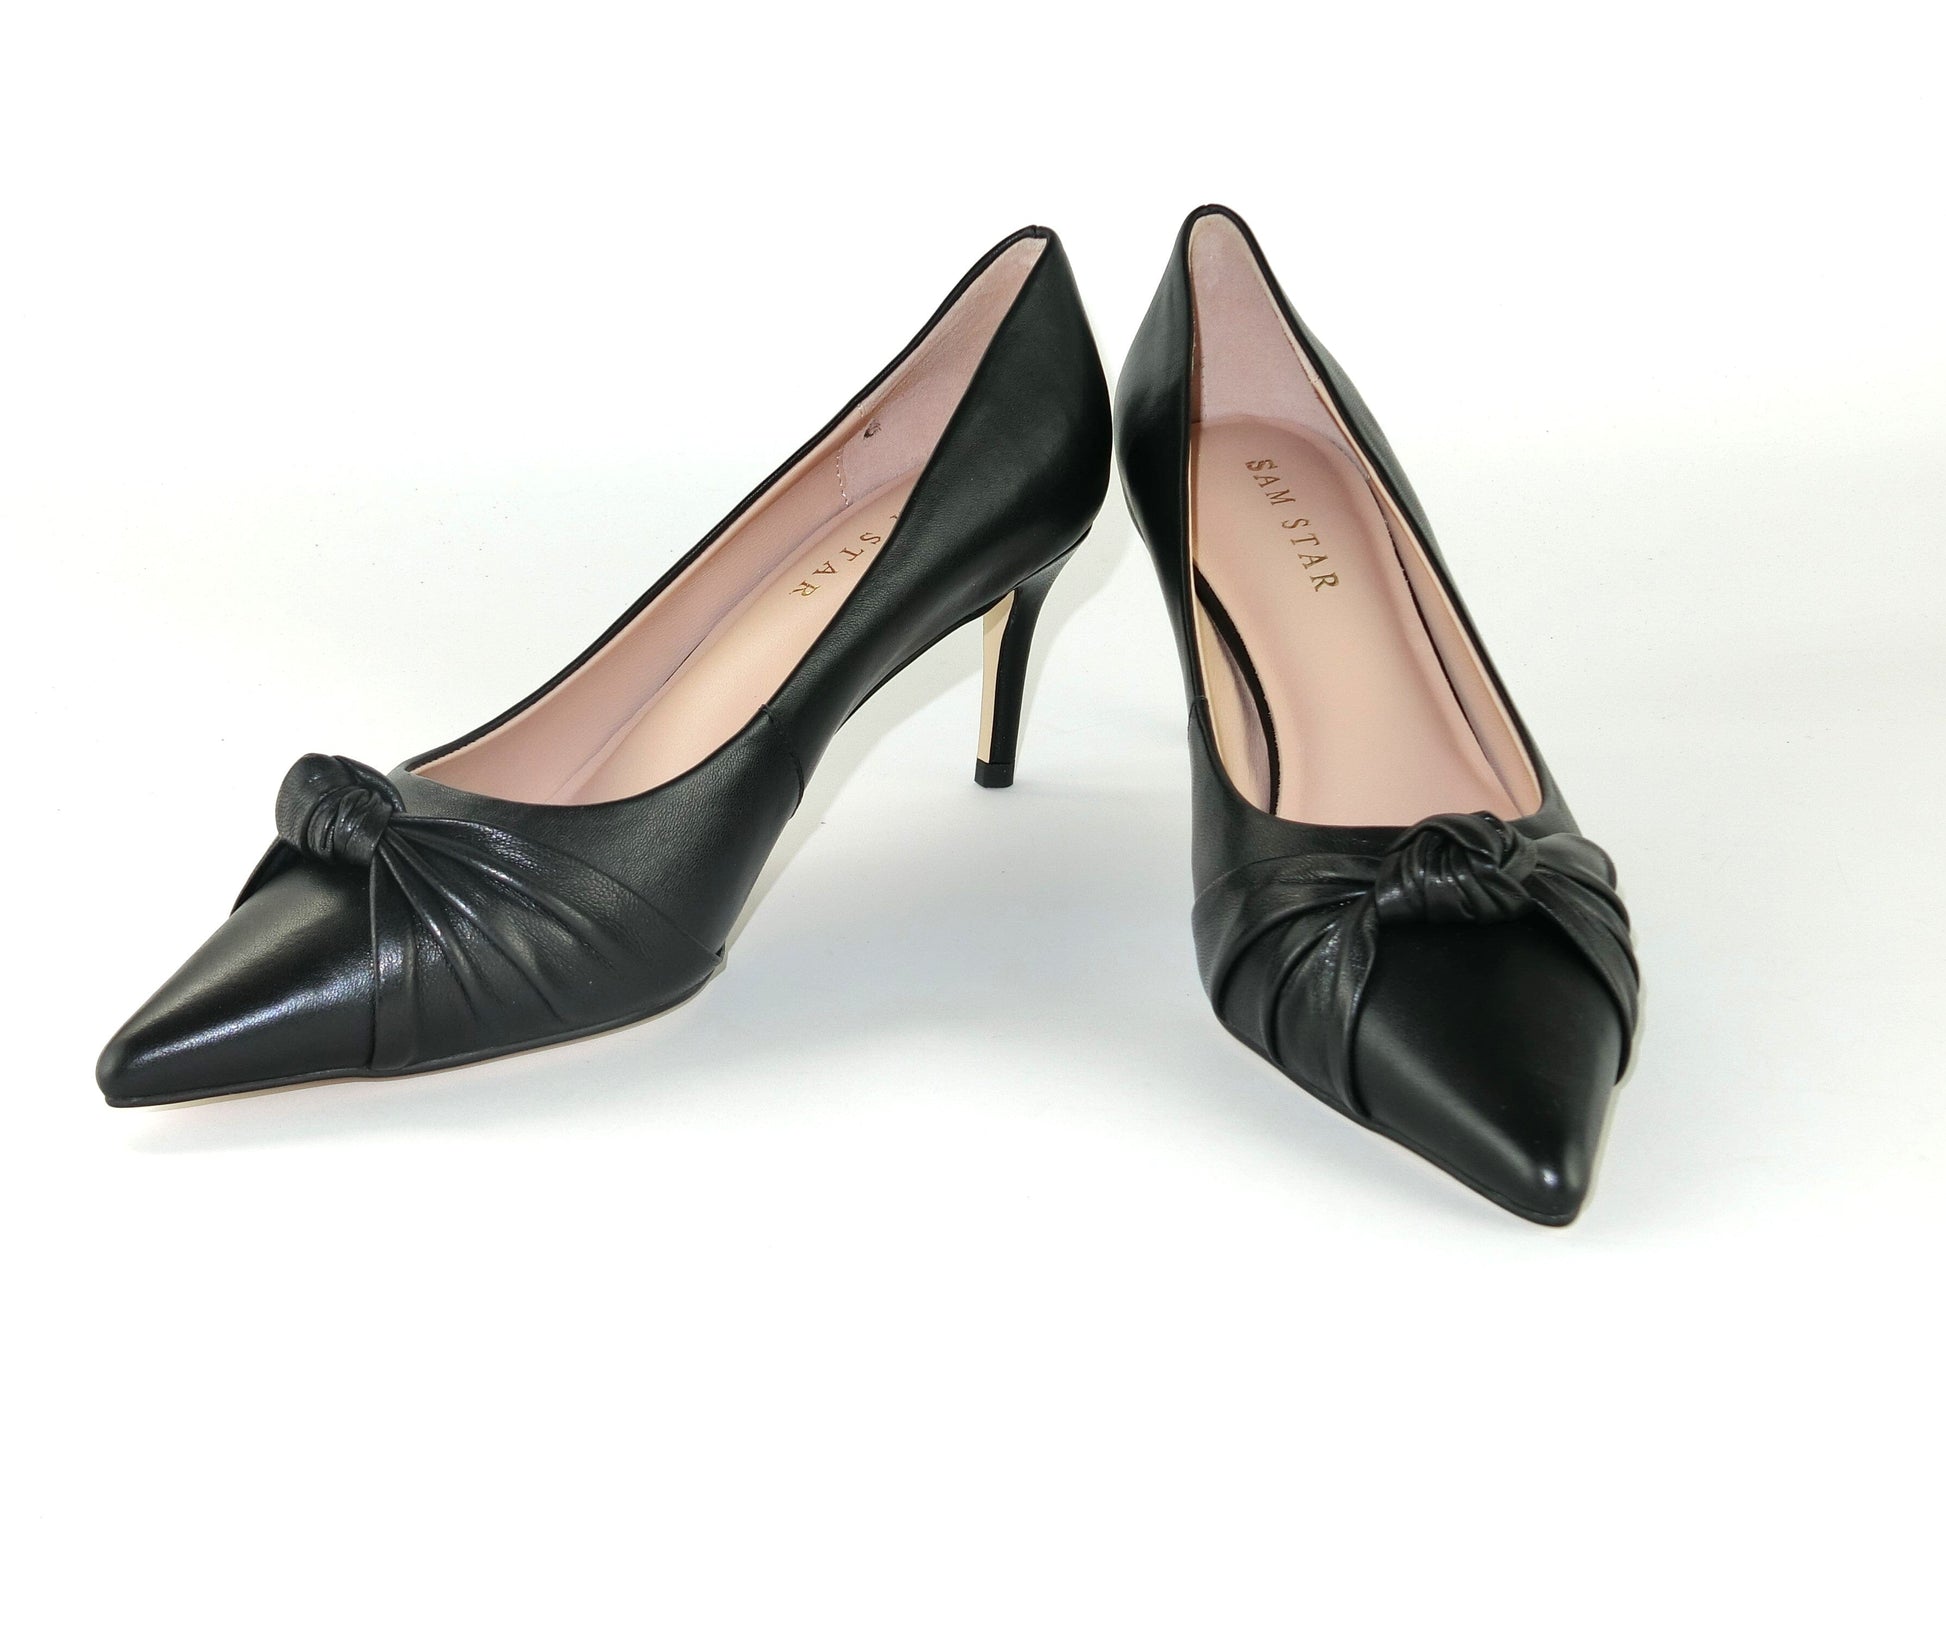 SS23004 Leather court shoes with knot design - Black and Tan ladies shoes Sam Star shoes Black 36/3 